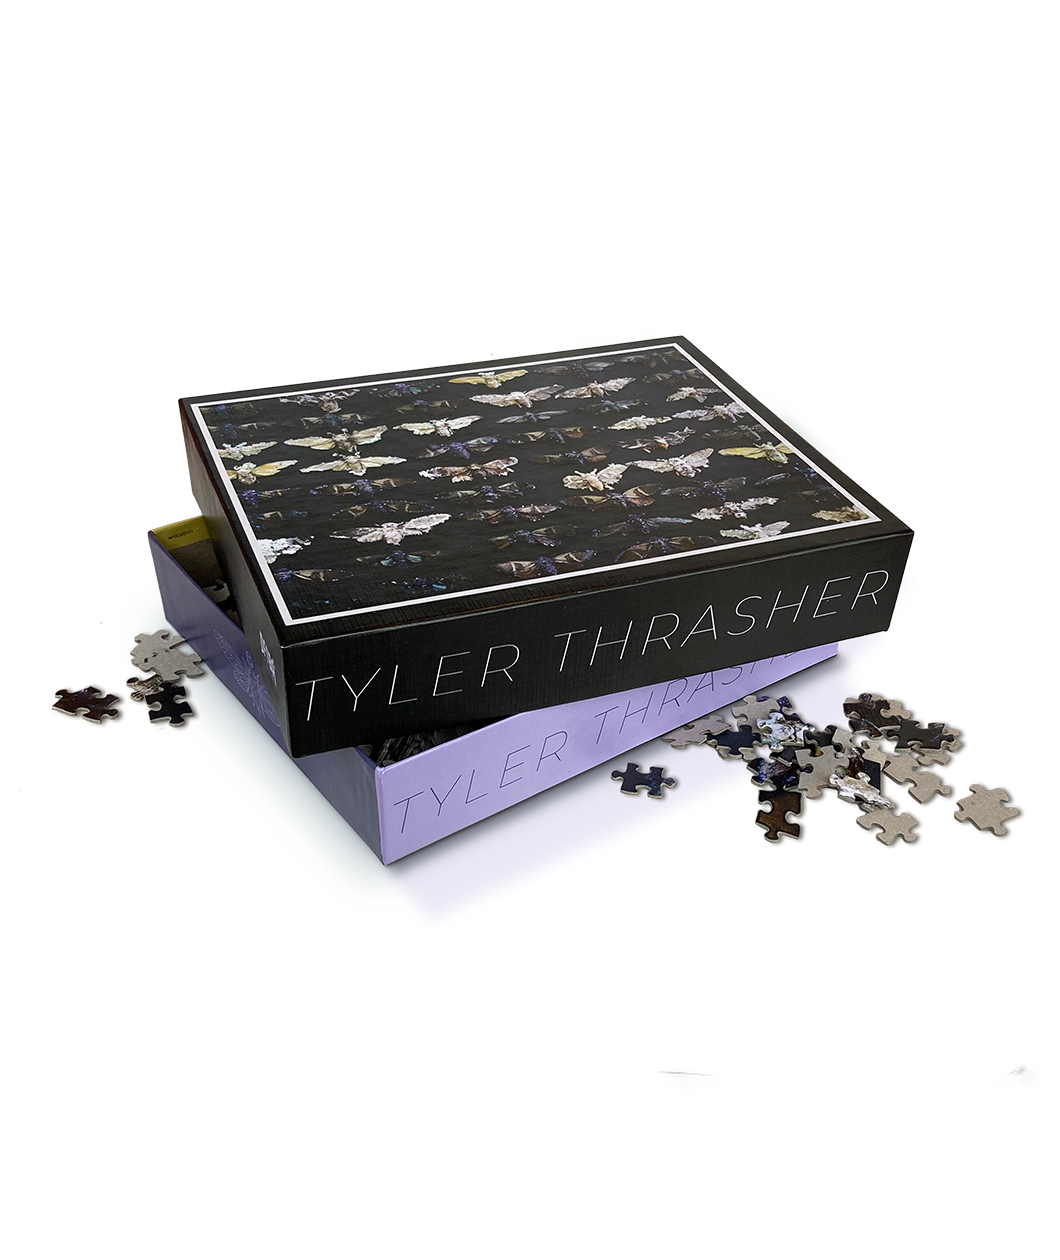 A black puzzle box lid with various cicadas on it sits atop a purple bottom puzzle box. Both boxes say "Tyler Thrasher" on them, and there are puzzle pieces scattered around the box.